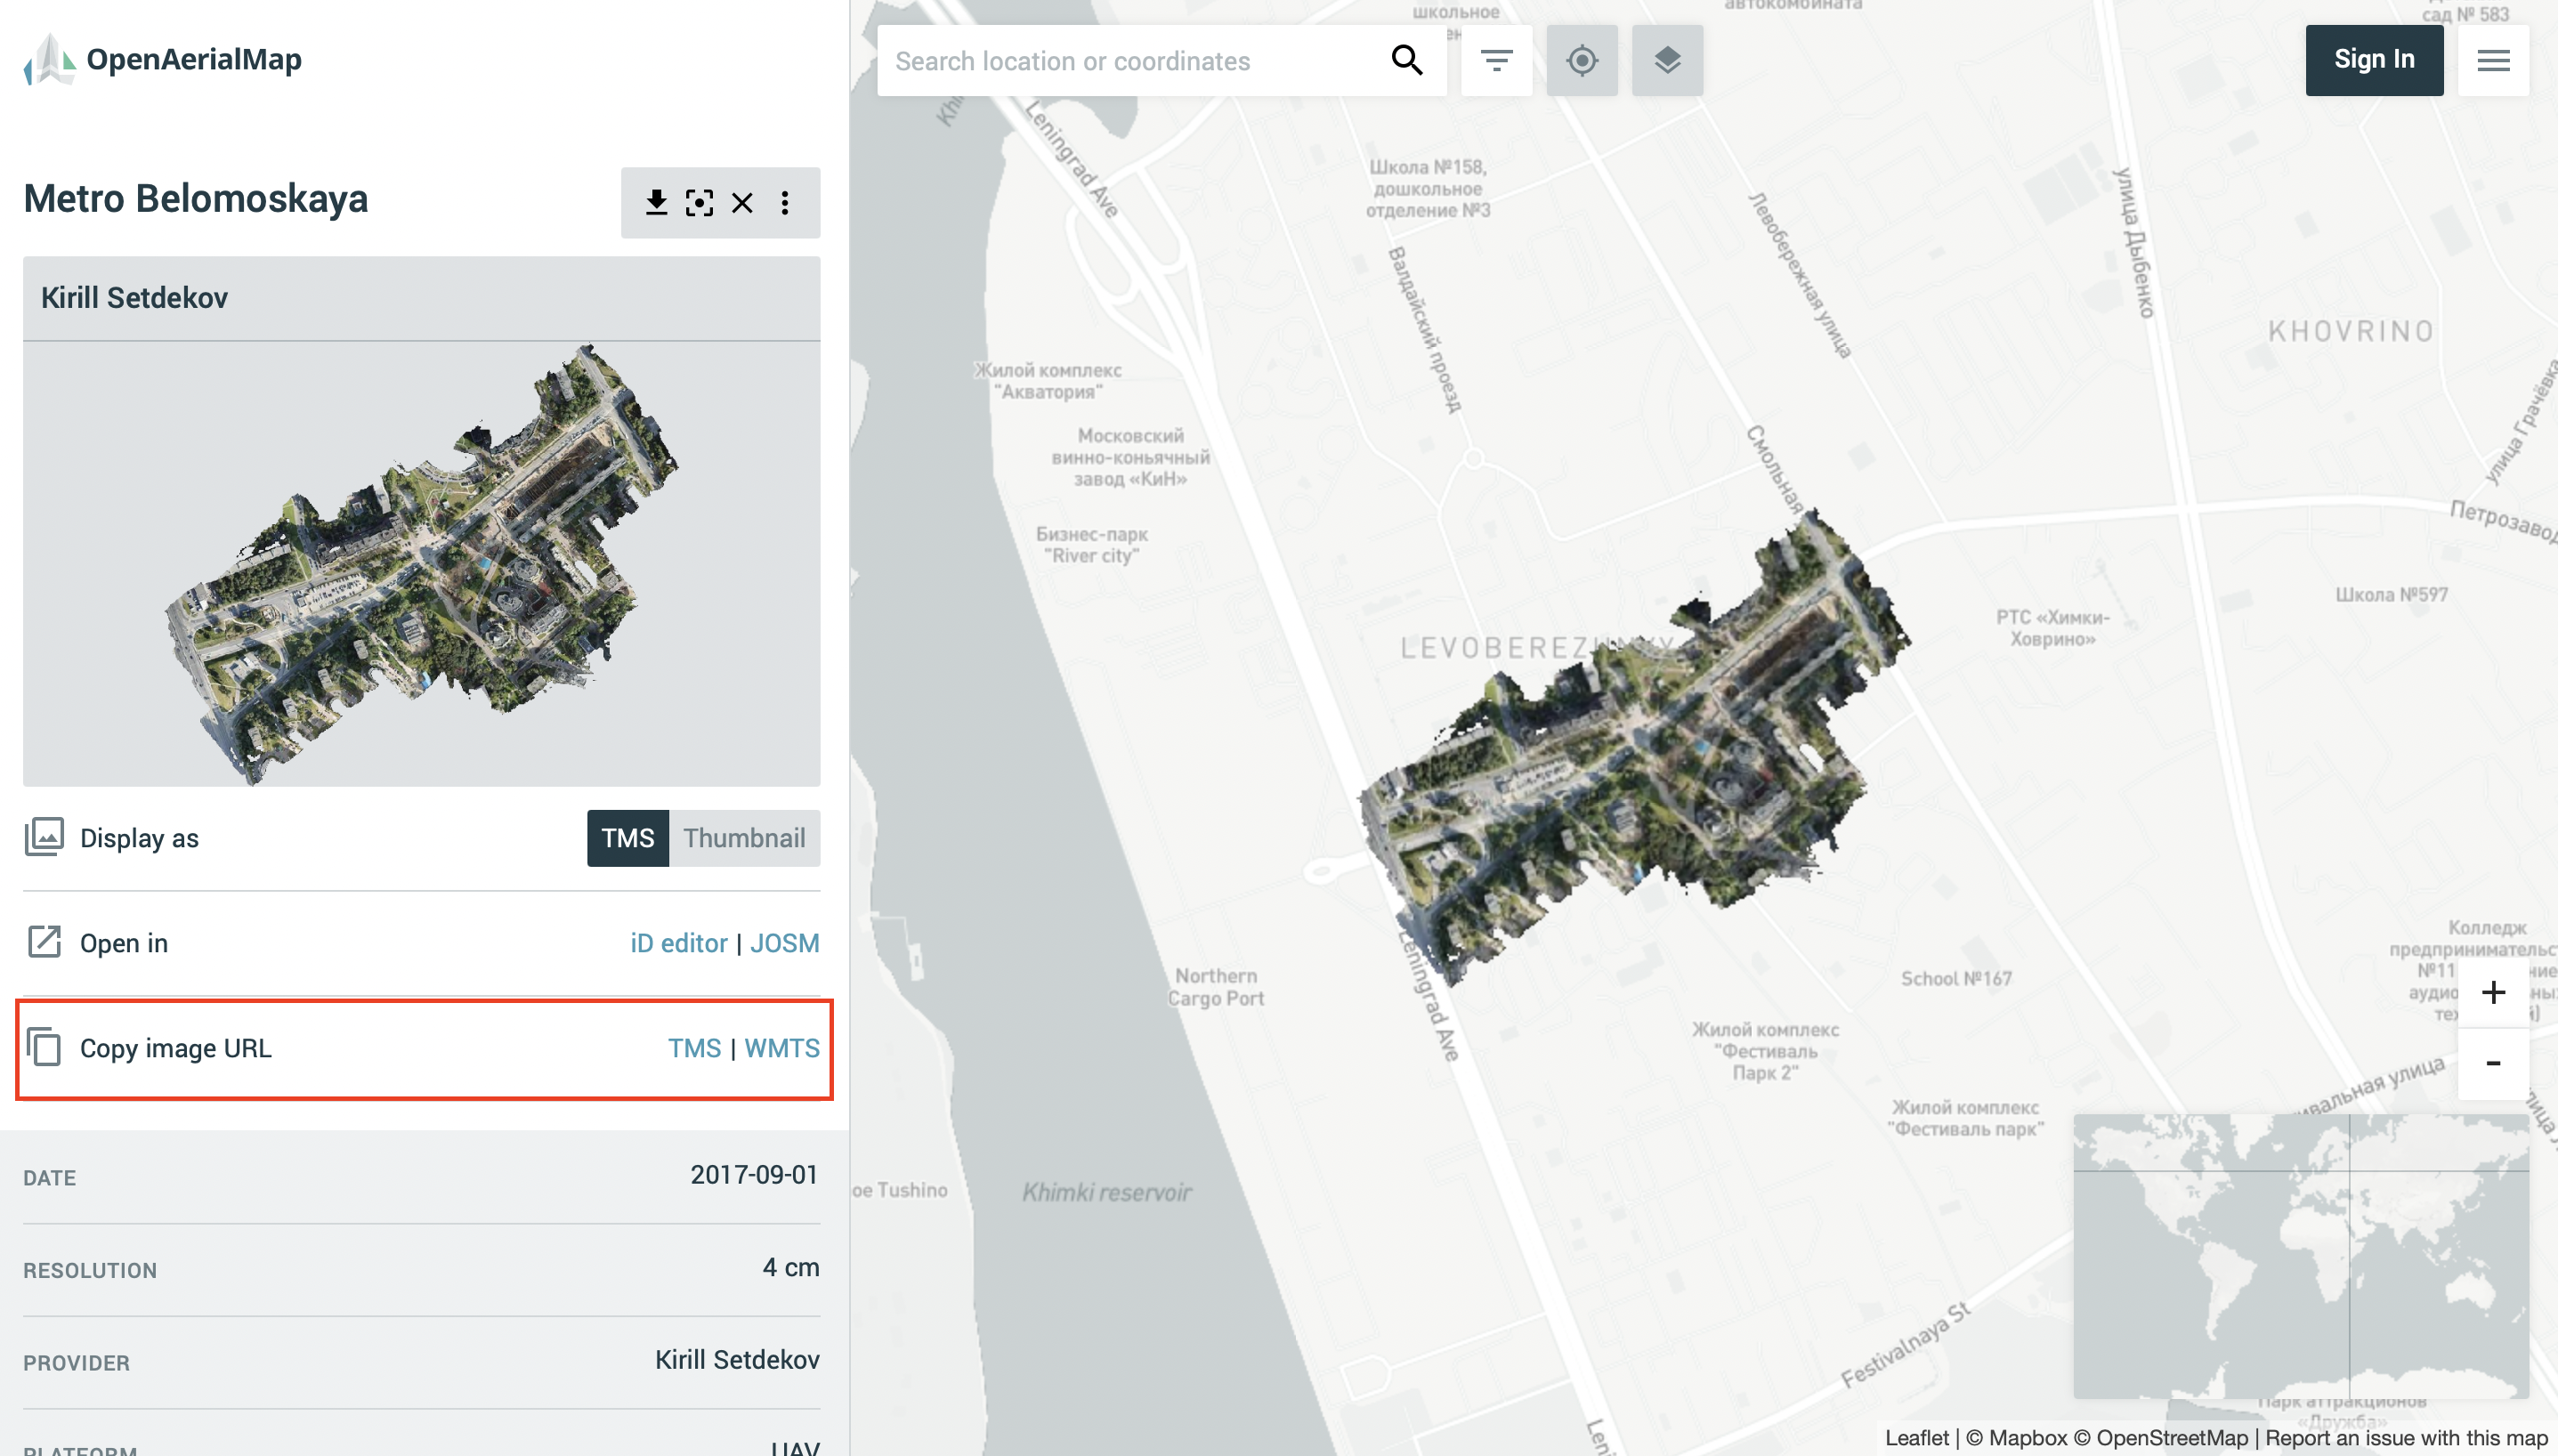 Search for imagery in OpenAerialMap